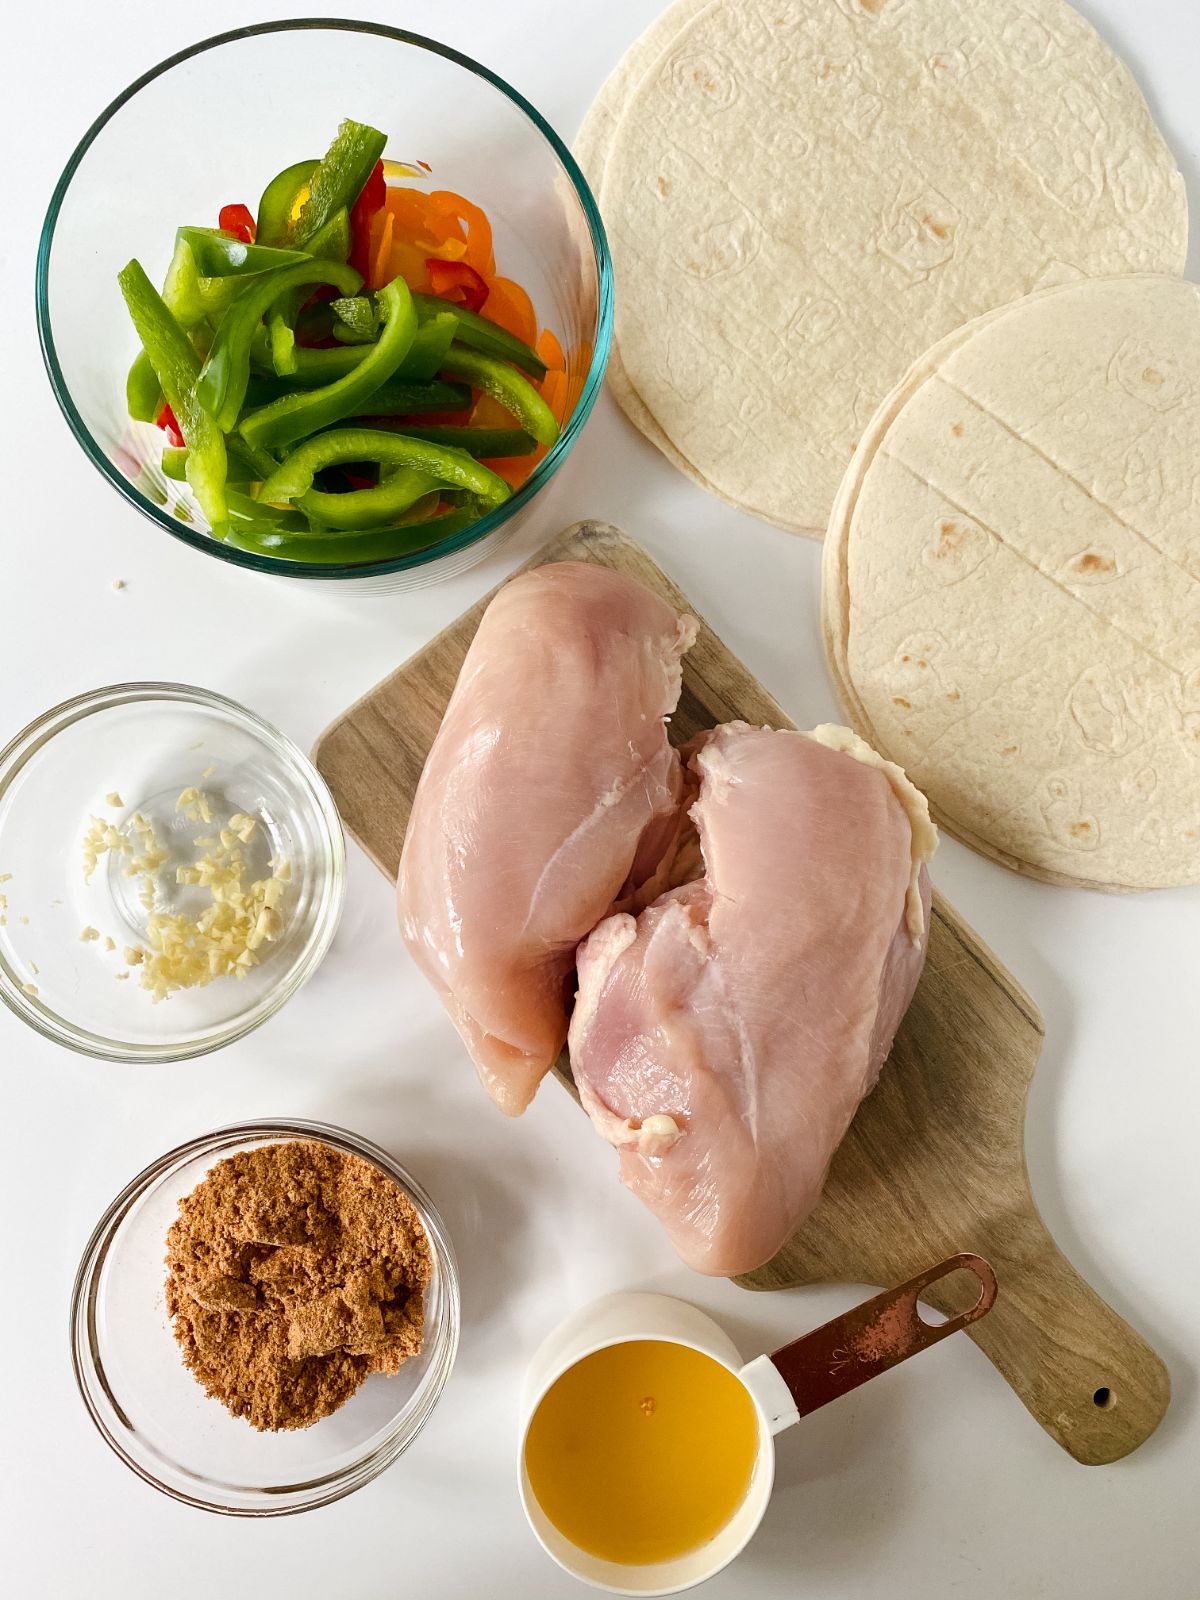 raw chicken on cutting board by bowl of peppers and flour tortillas